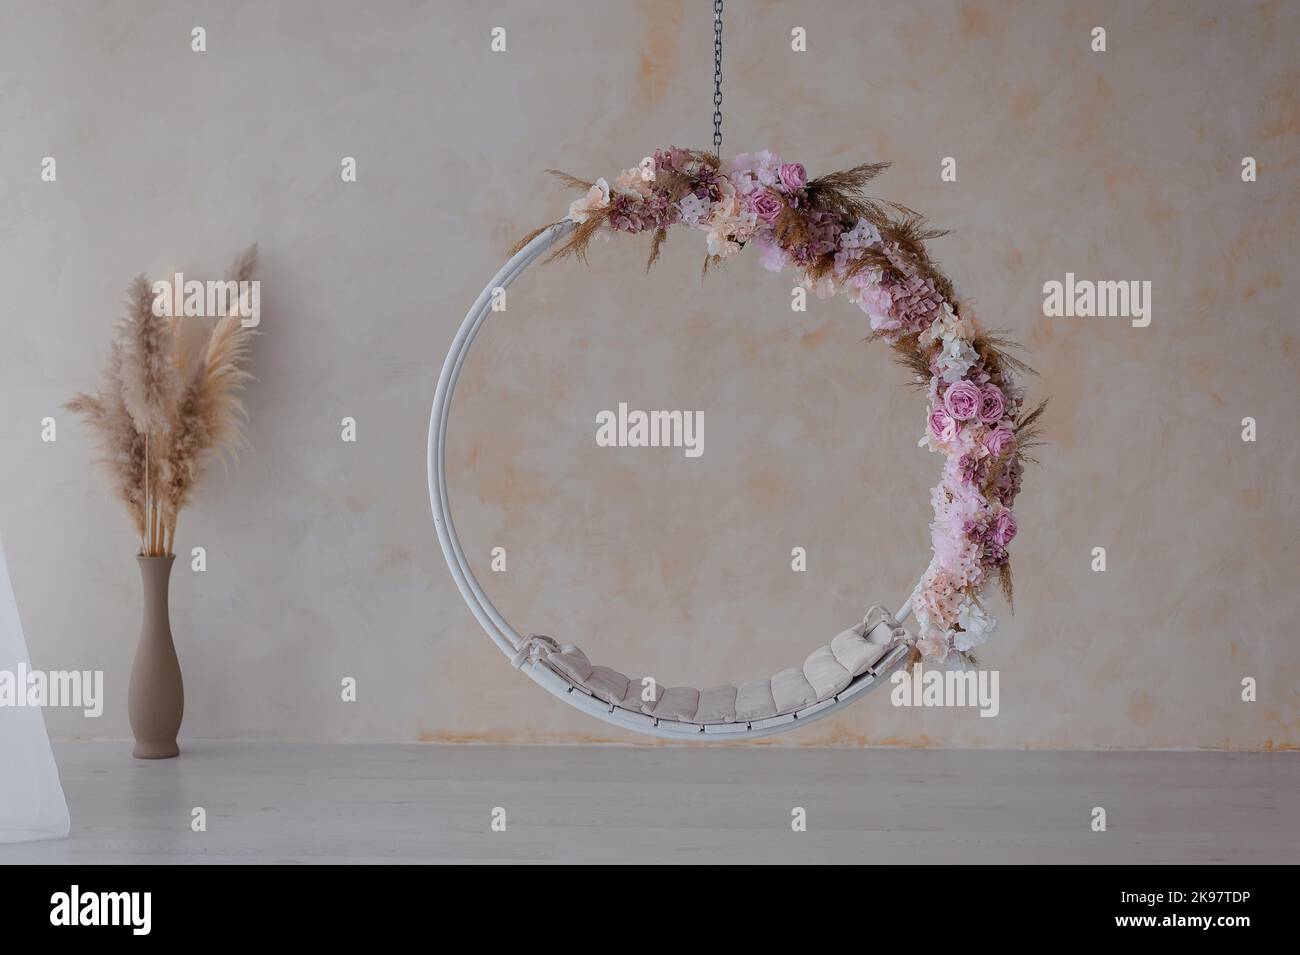 White swing on a chain, decorated with pink flowers. Vase in the background Stock Photo